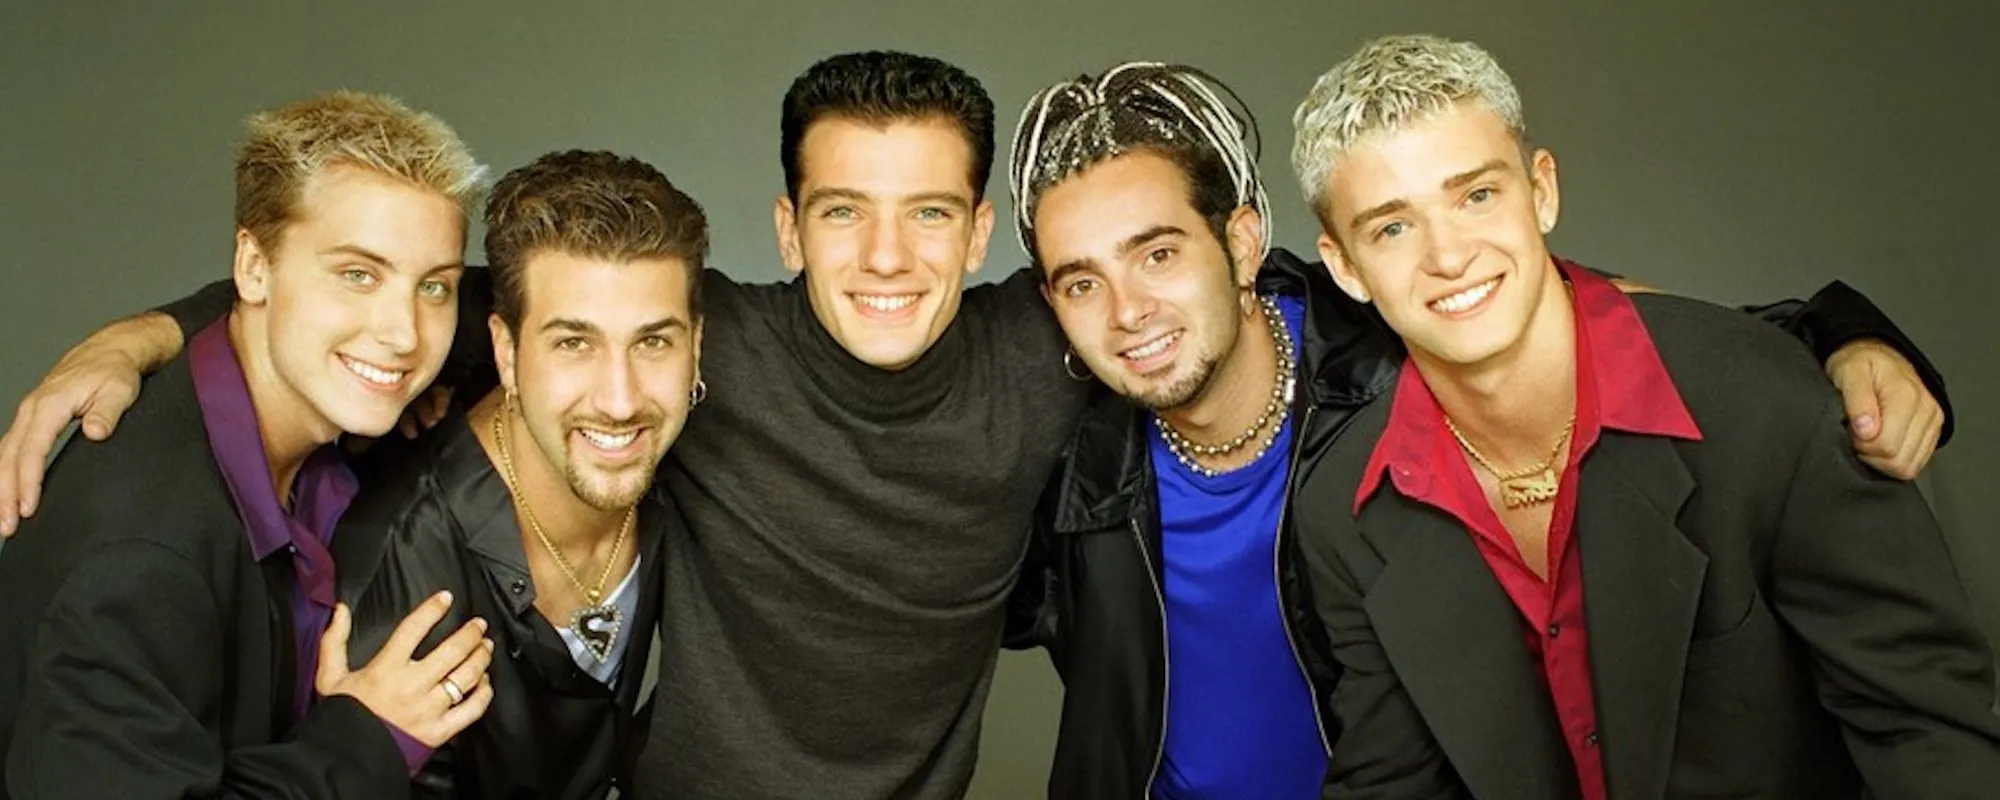 5 Things to Know About *NSYNC